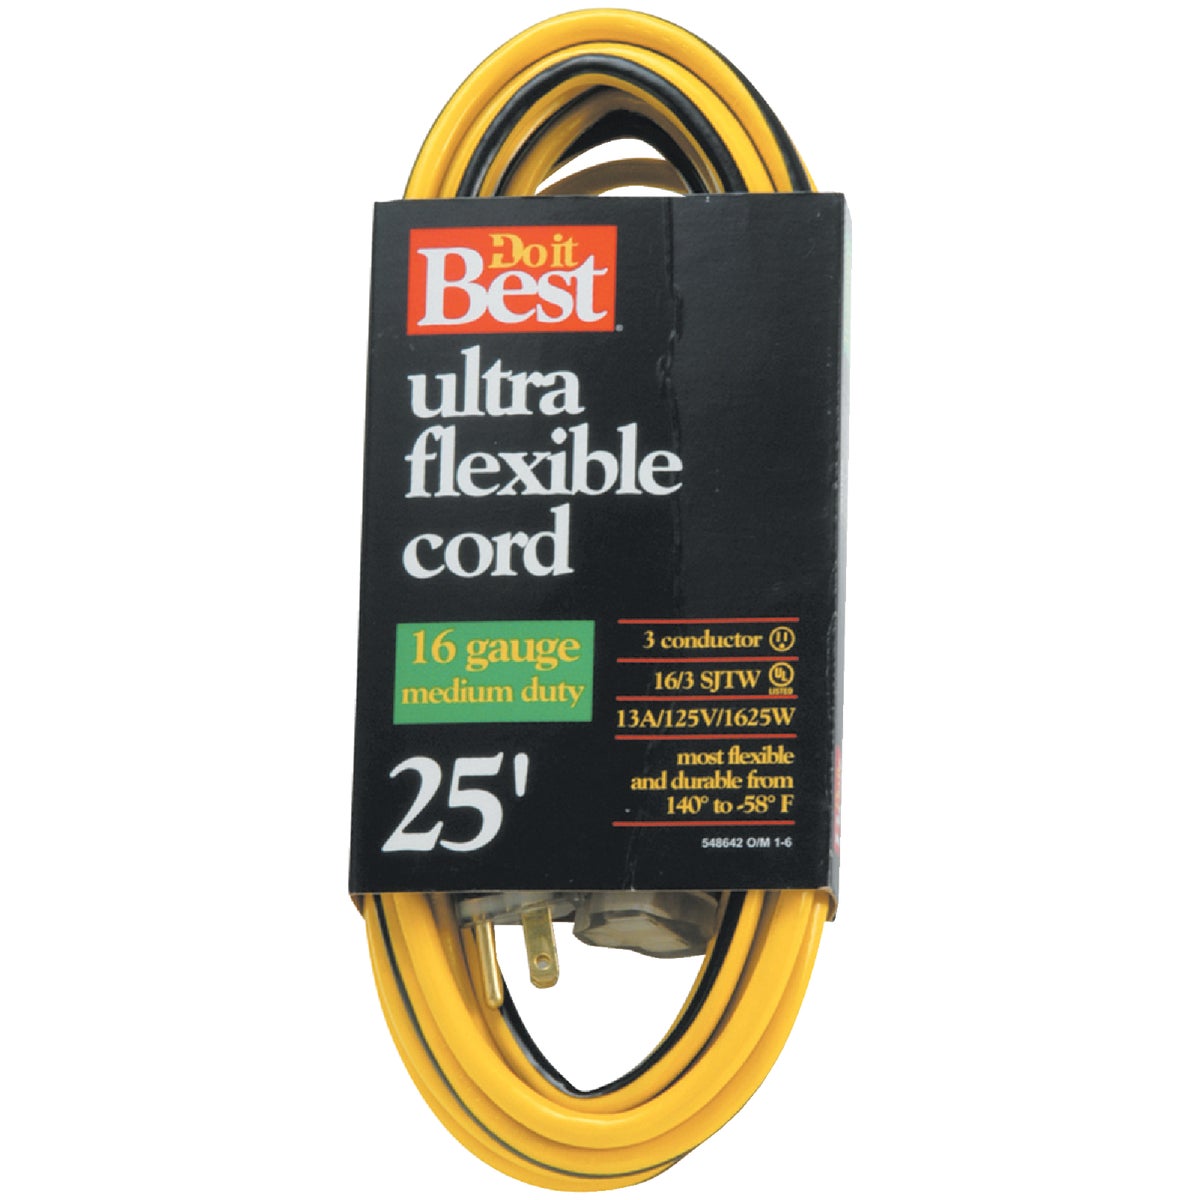 Item 548642, 16-gauge/3-conductor, medium-duty extension cord for serious do it 